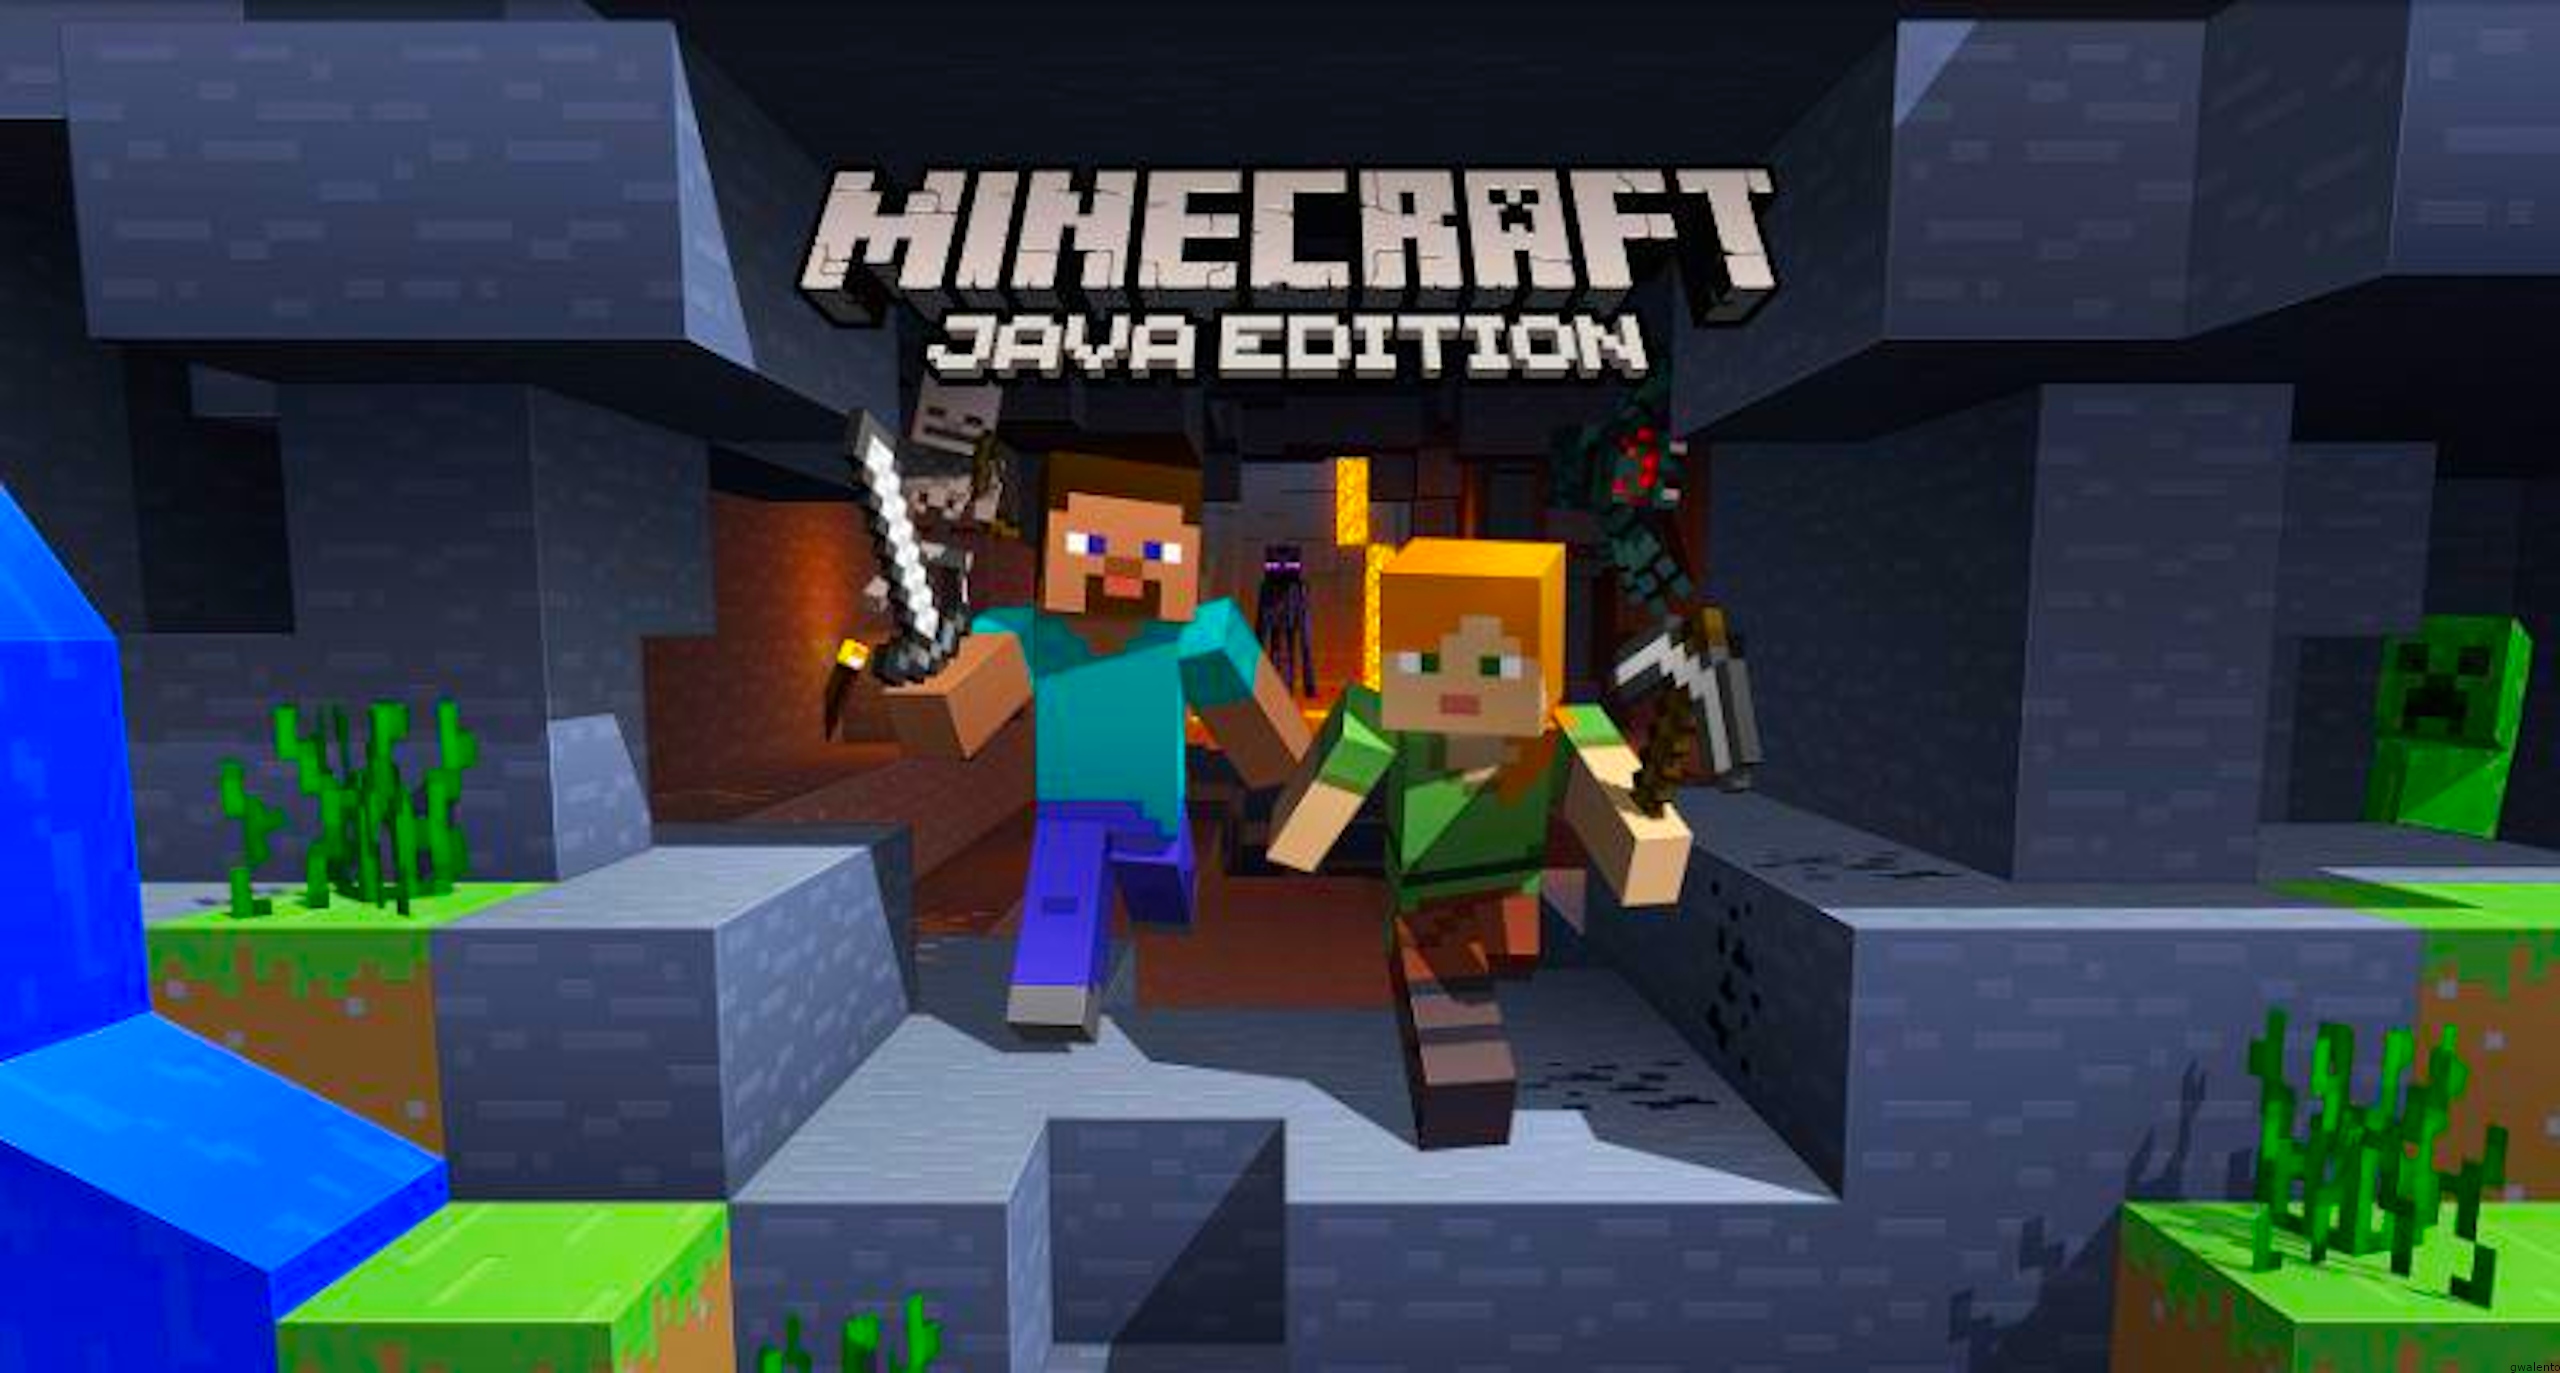 Buy Minecraft Java Edition (Global Key) and download